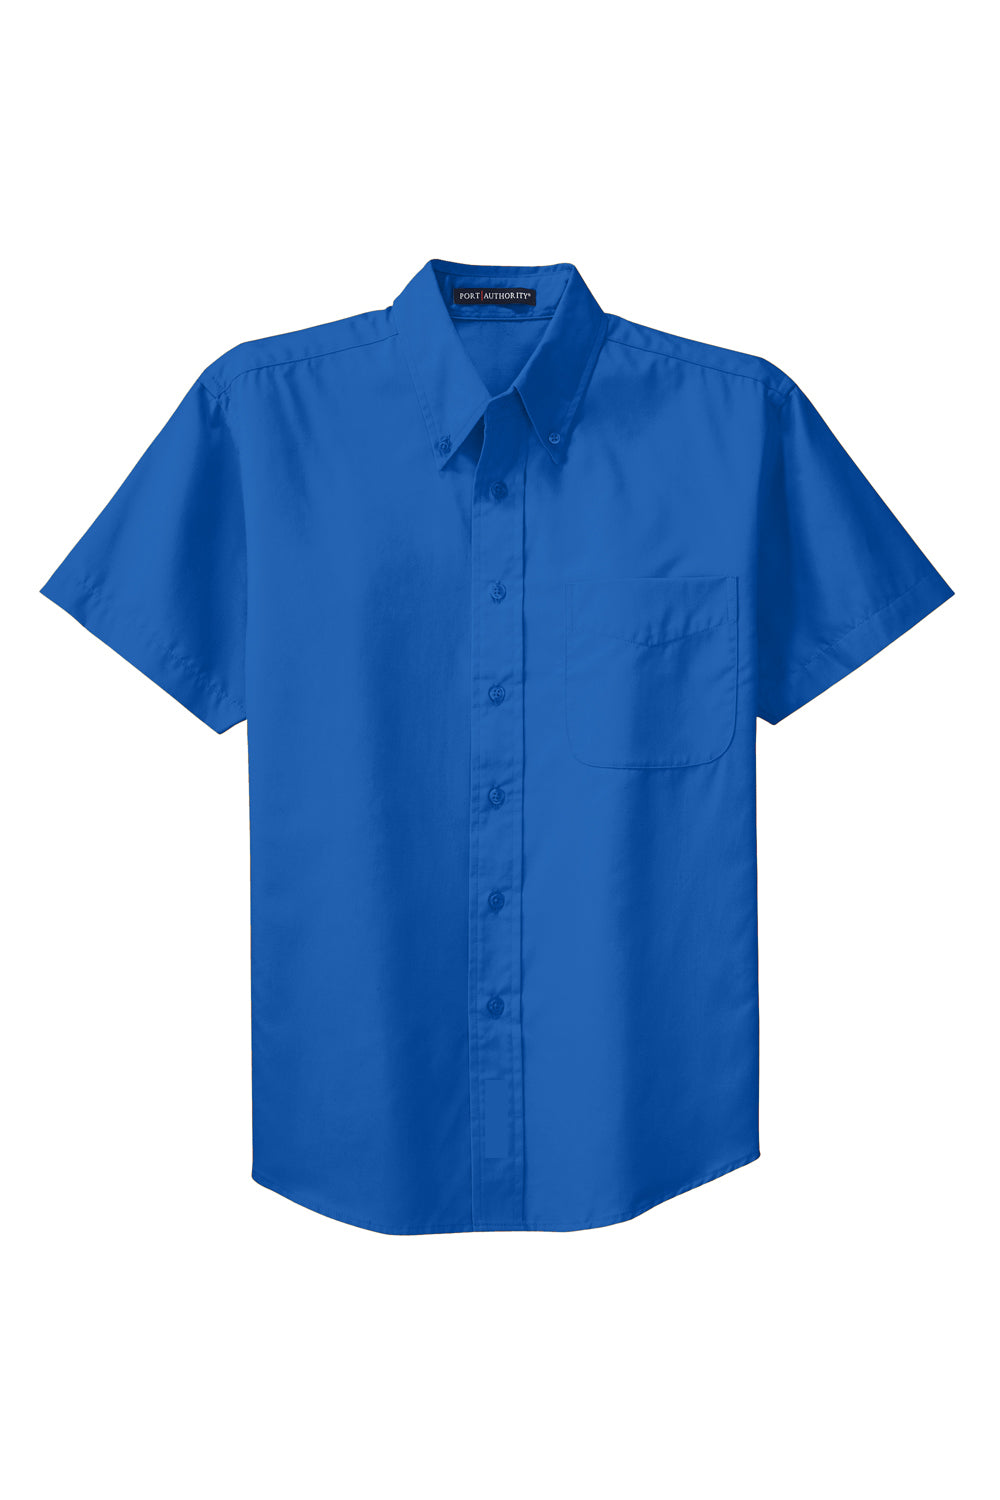 Port Authority S508/TLS508 Mens Easy Care Wrinkle Resistant Short Sleeve Button Down Shirt w/ Pocket Strong Blue Flat Front